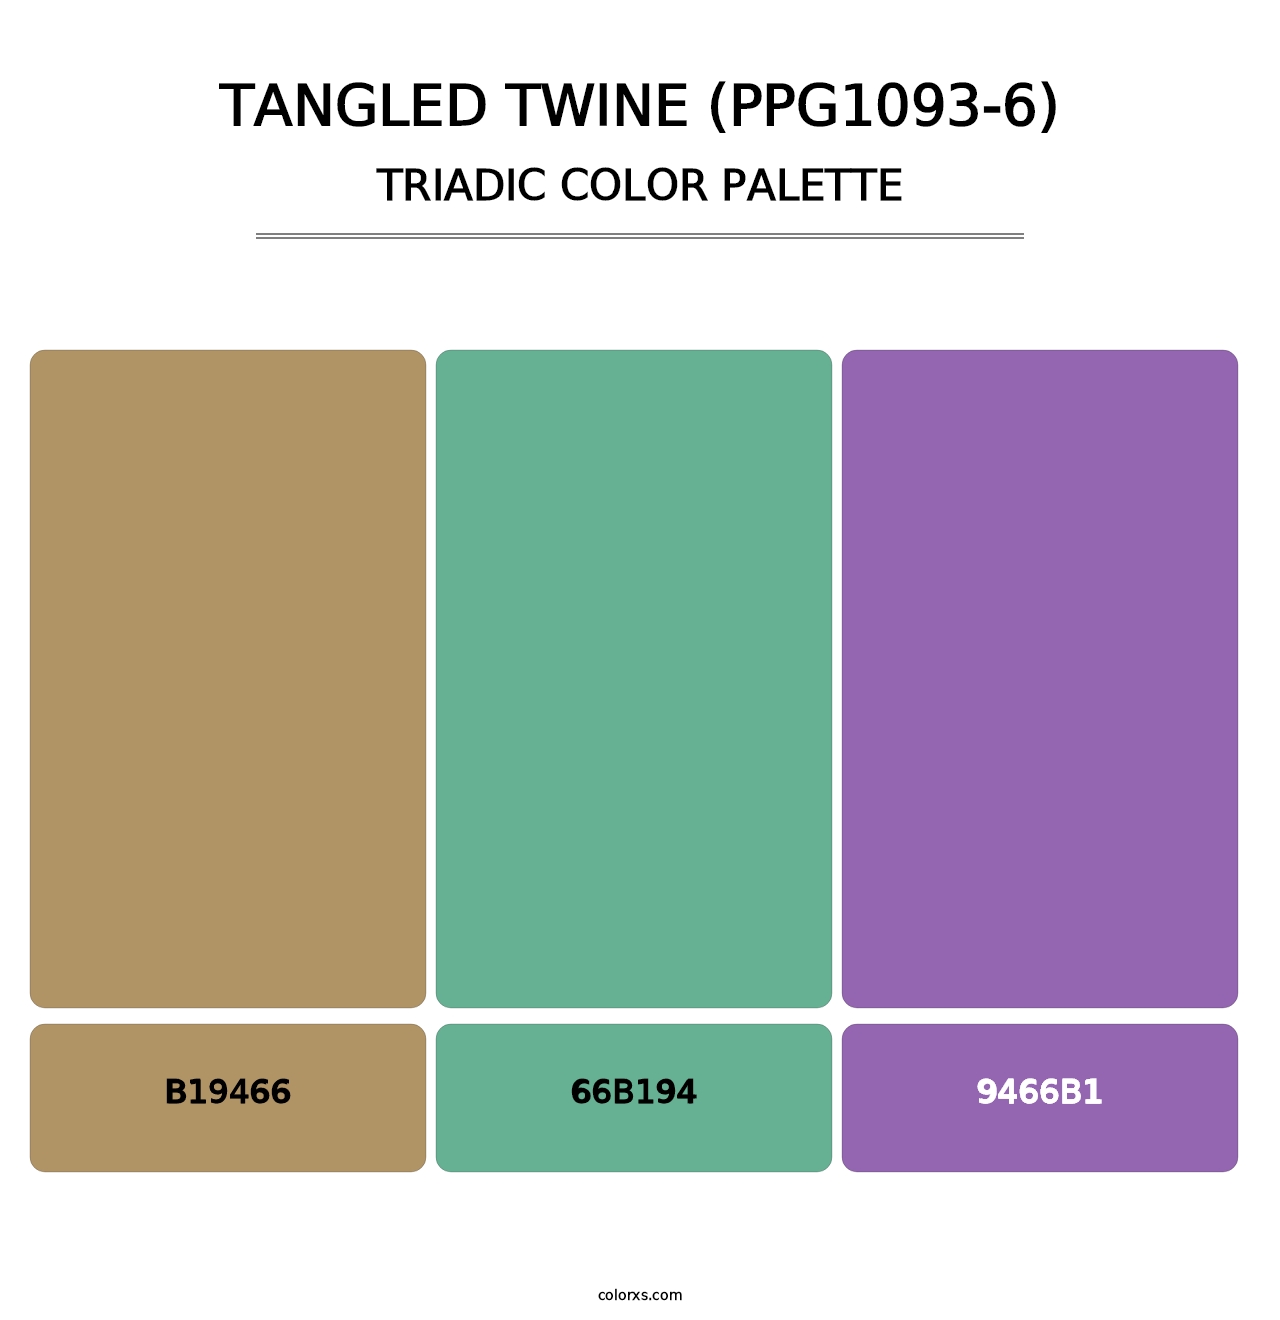 Tangled Twine (PPG1093-6) - Triadic Color Palette